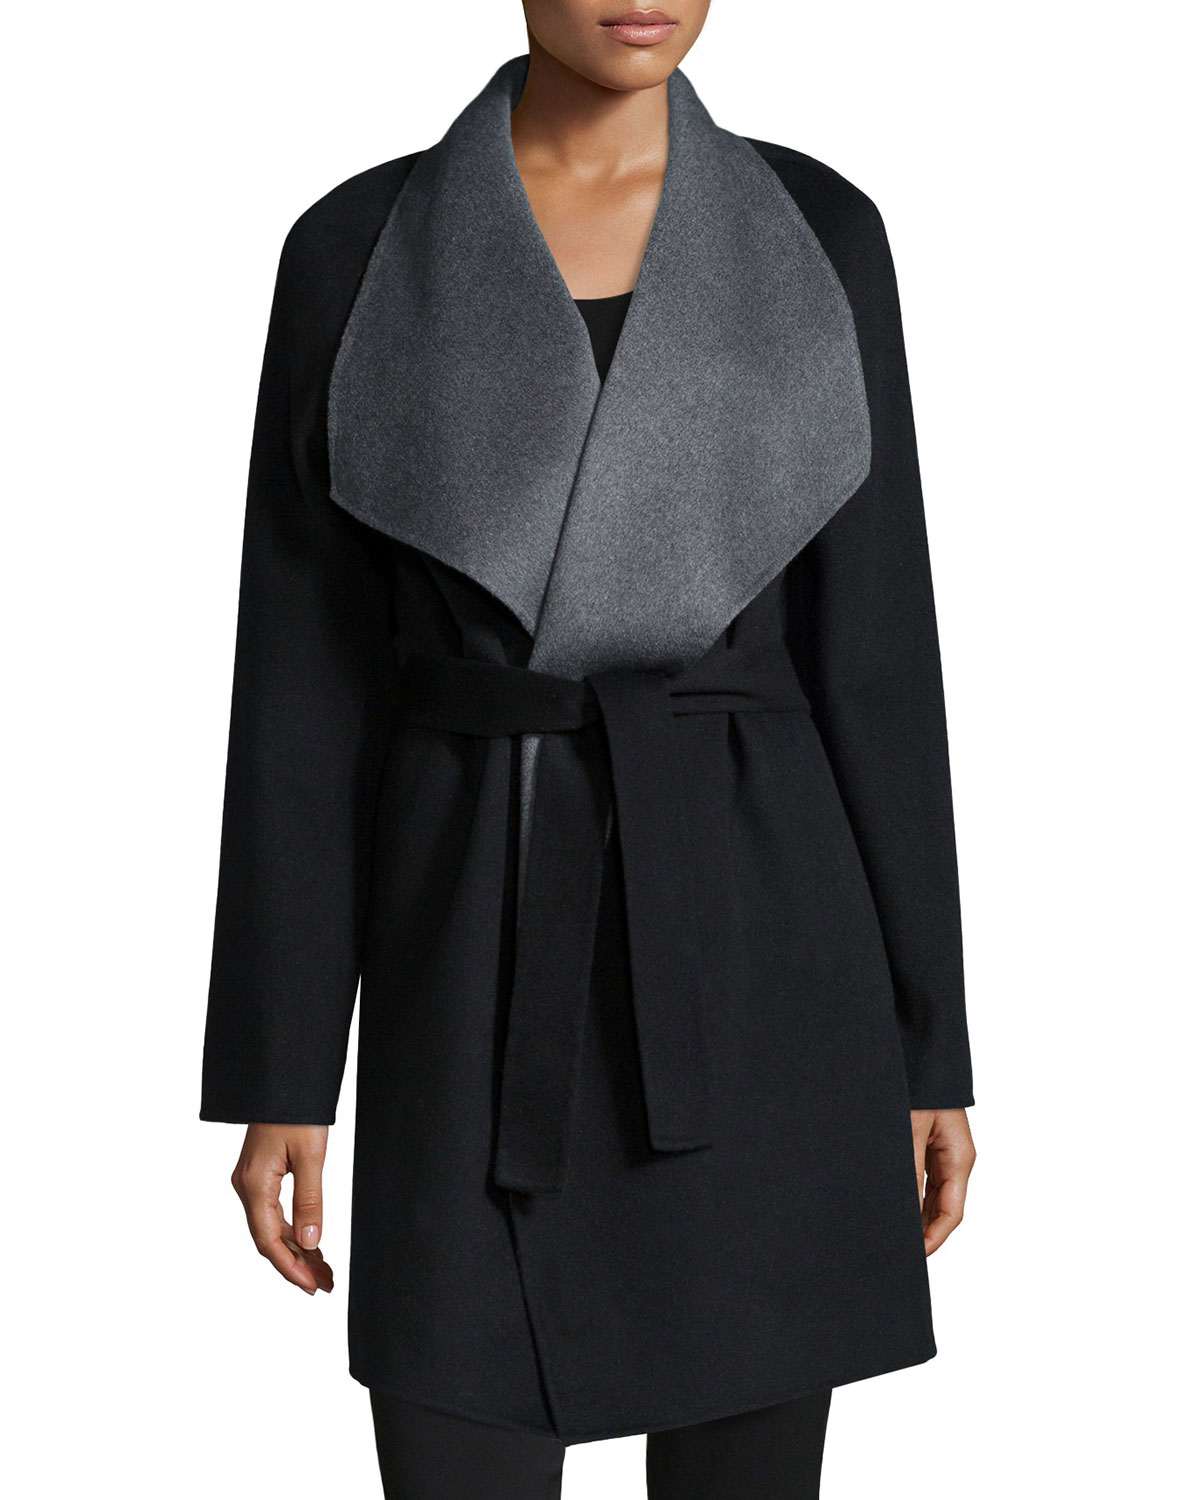 Lyst - Neiman Marcus Cashmere Double-face Two-tone Wrap Coat in Black